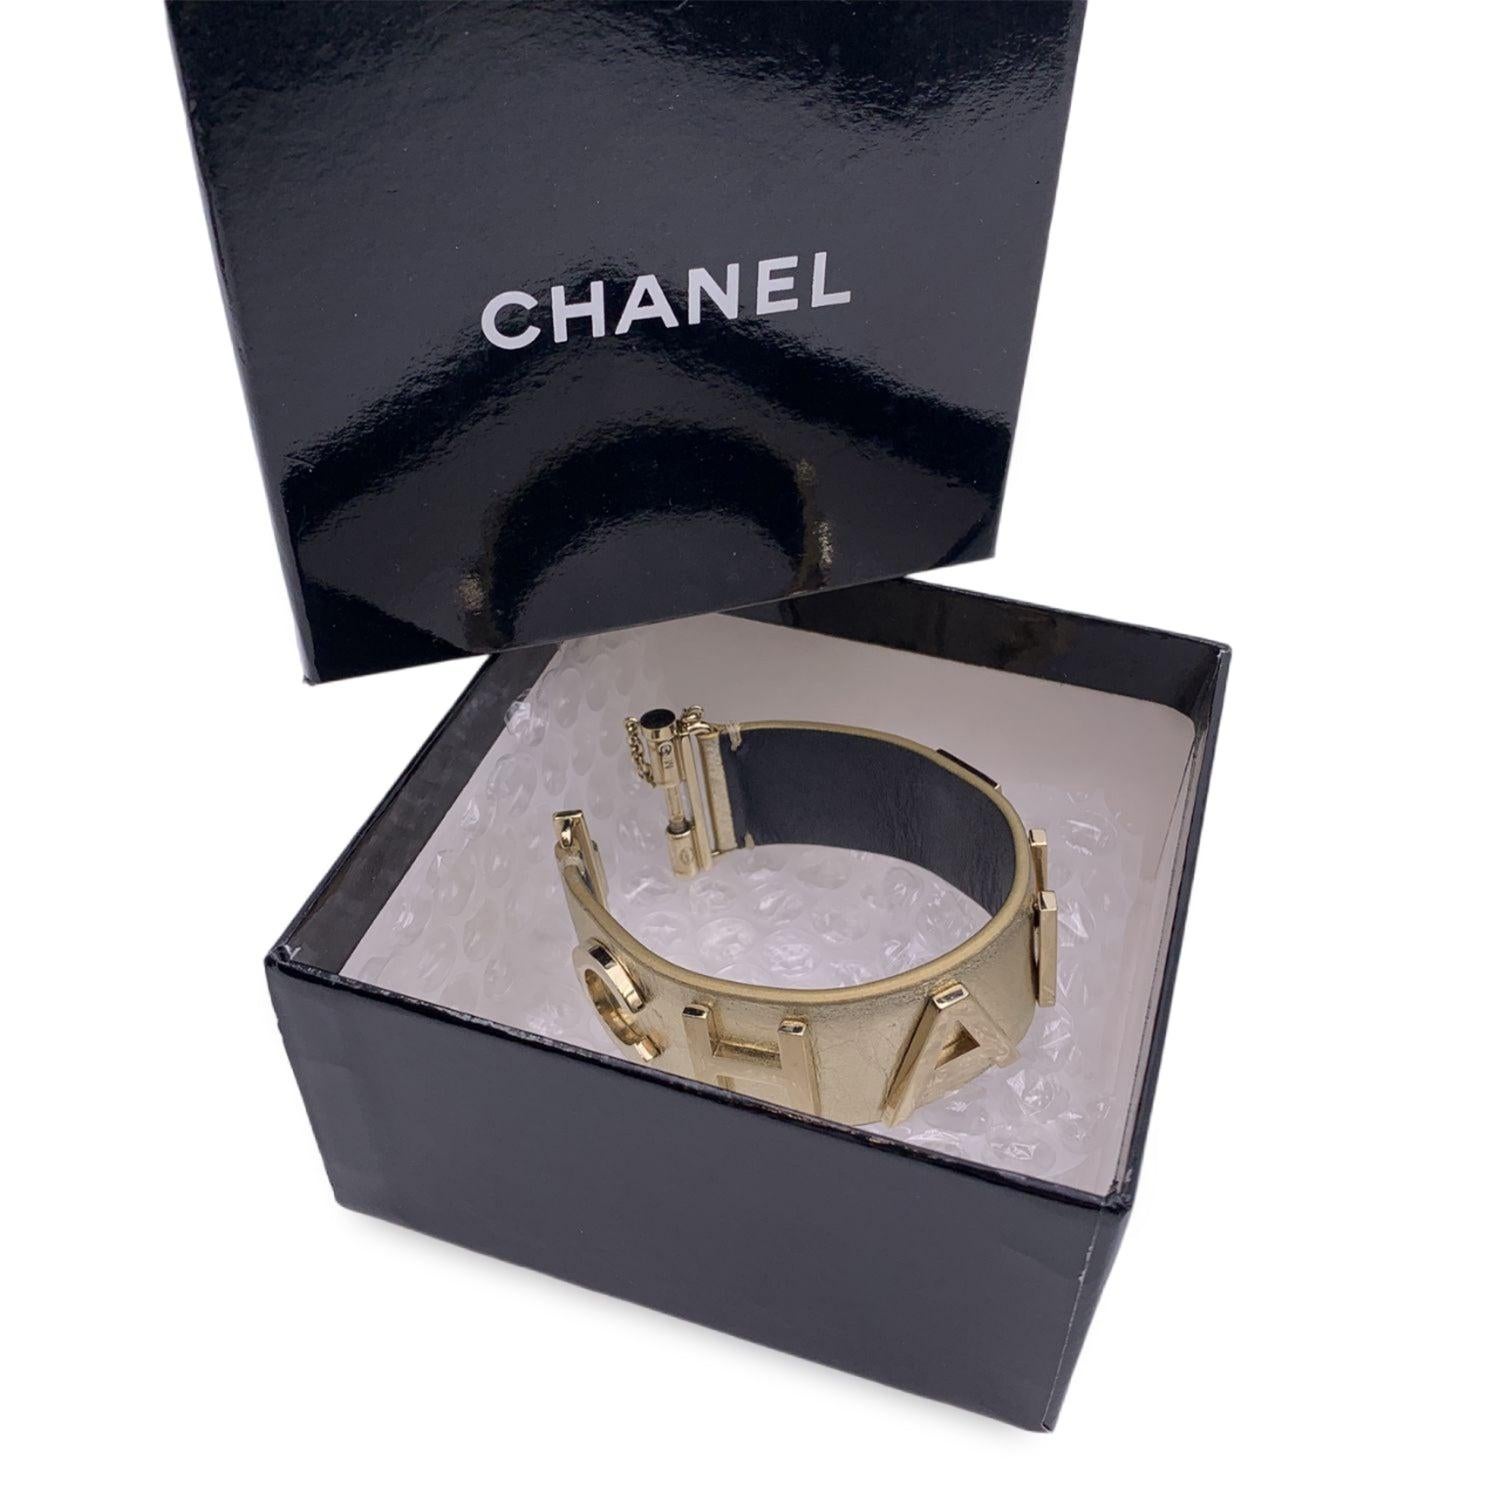 Lovely bracelet by CHANEL, crafted of gold metal leather . It features gold metal CHANEL lettering. Slide closure 'Chanel B18 CC B Made in Italy' oval hallmark near the closure. Size M. Total lenght: 7 inches - 17.8 cm. Height: 1 inch - 2.5 cm